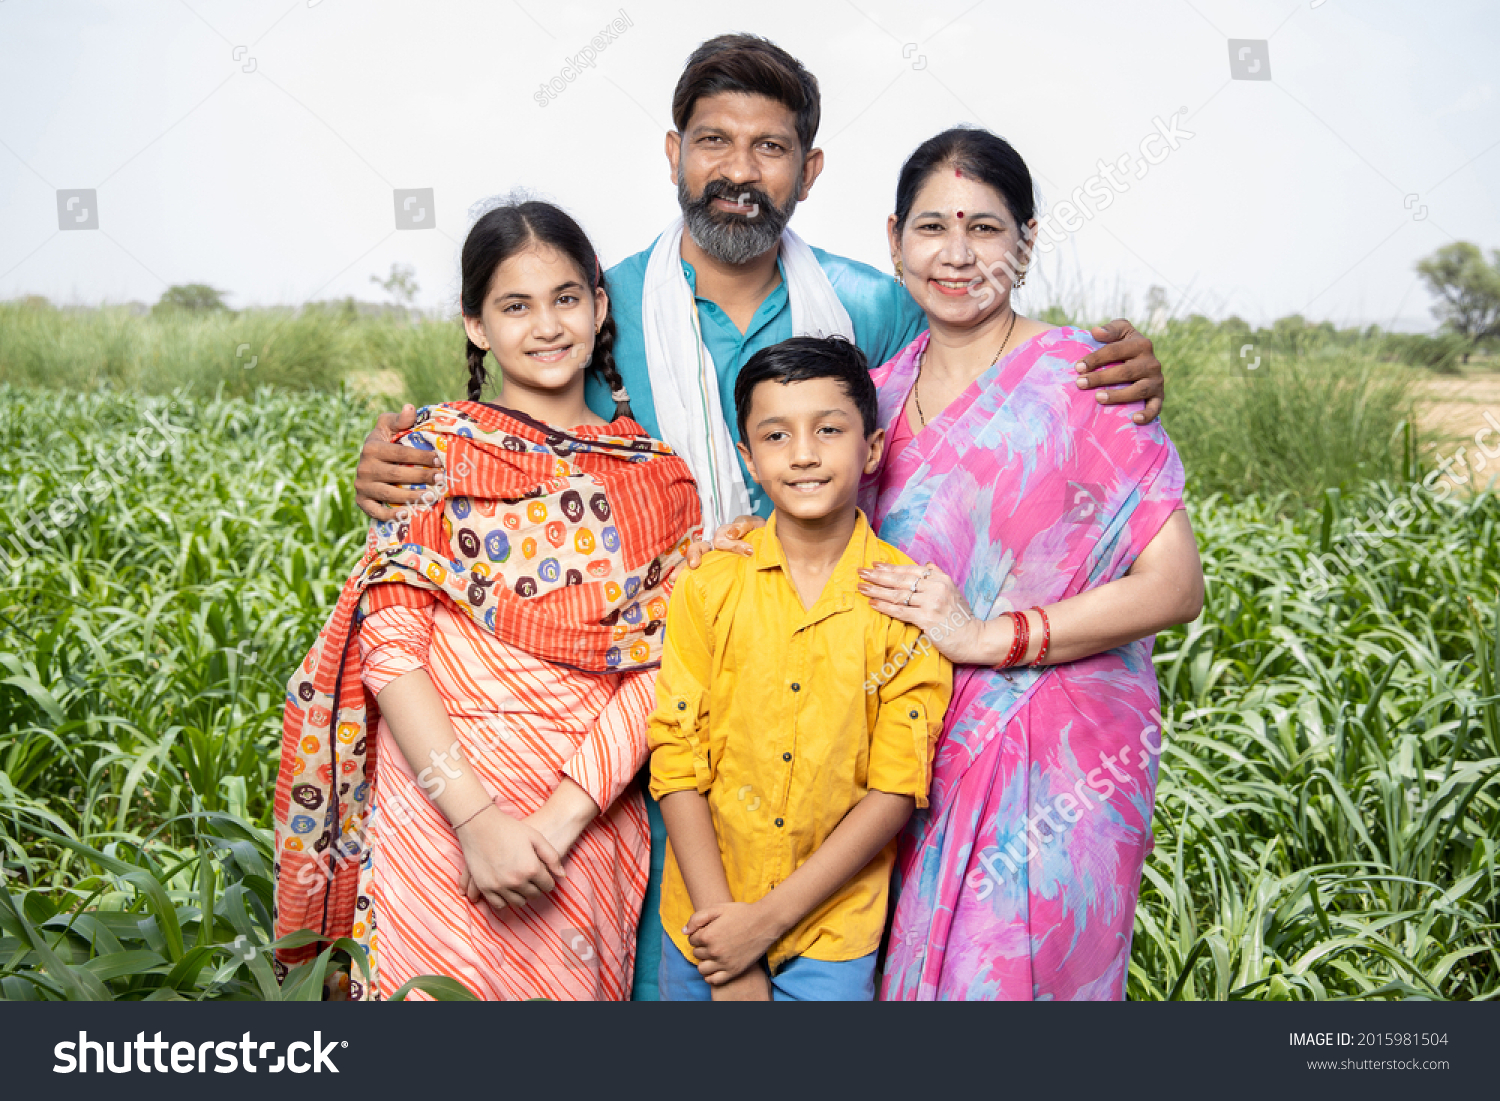 Portrait of happy rural indian family standing in agriculture field. Parents with their children, farmer husband wife with daughter and son. Beard man wearing kurta and woman wearing sari,  #2015981504